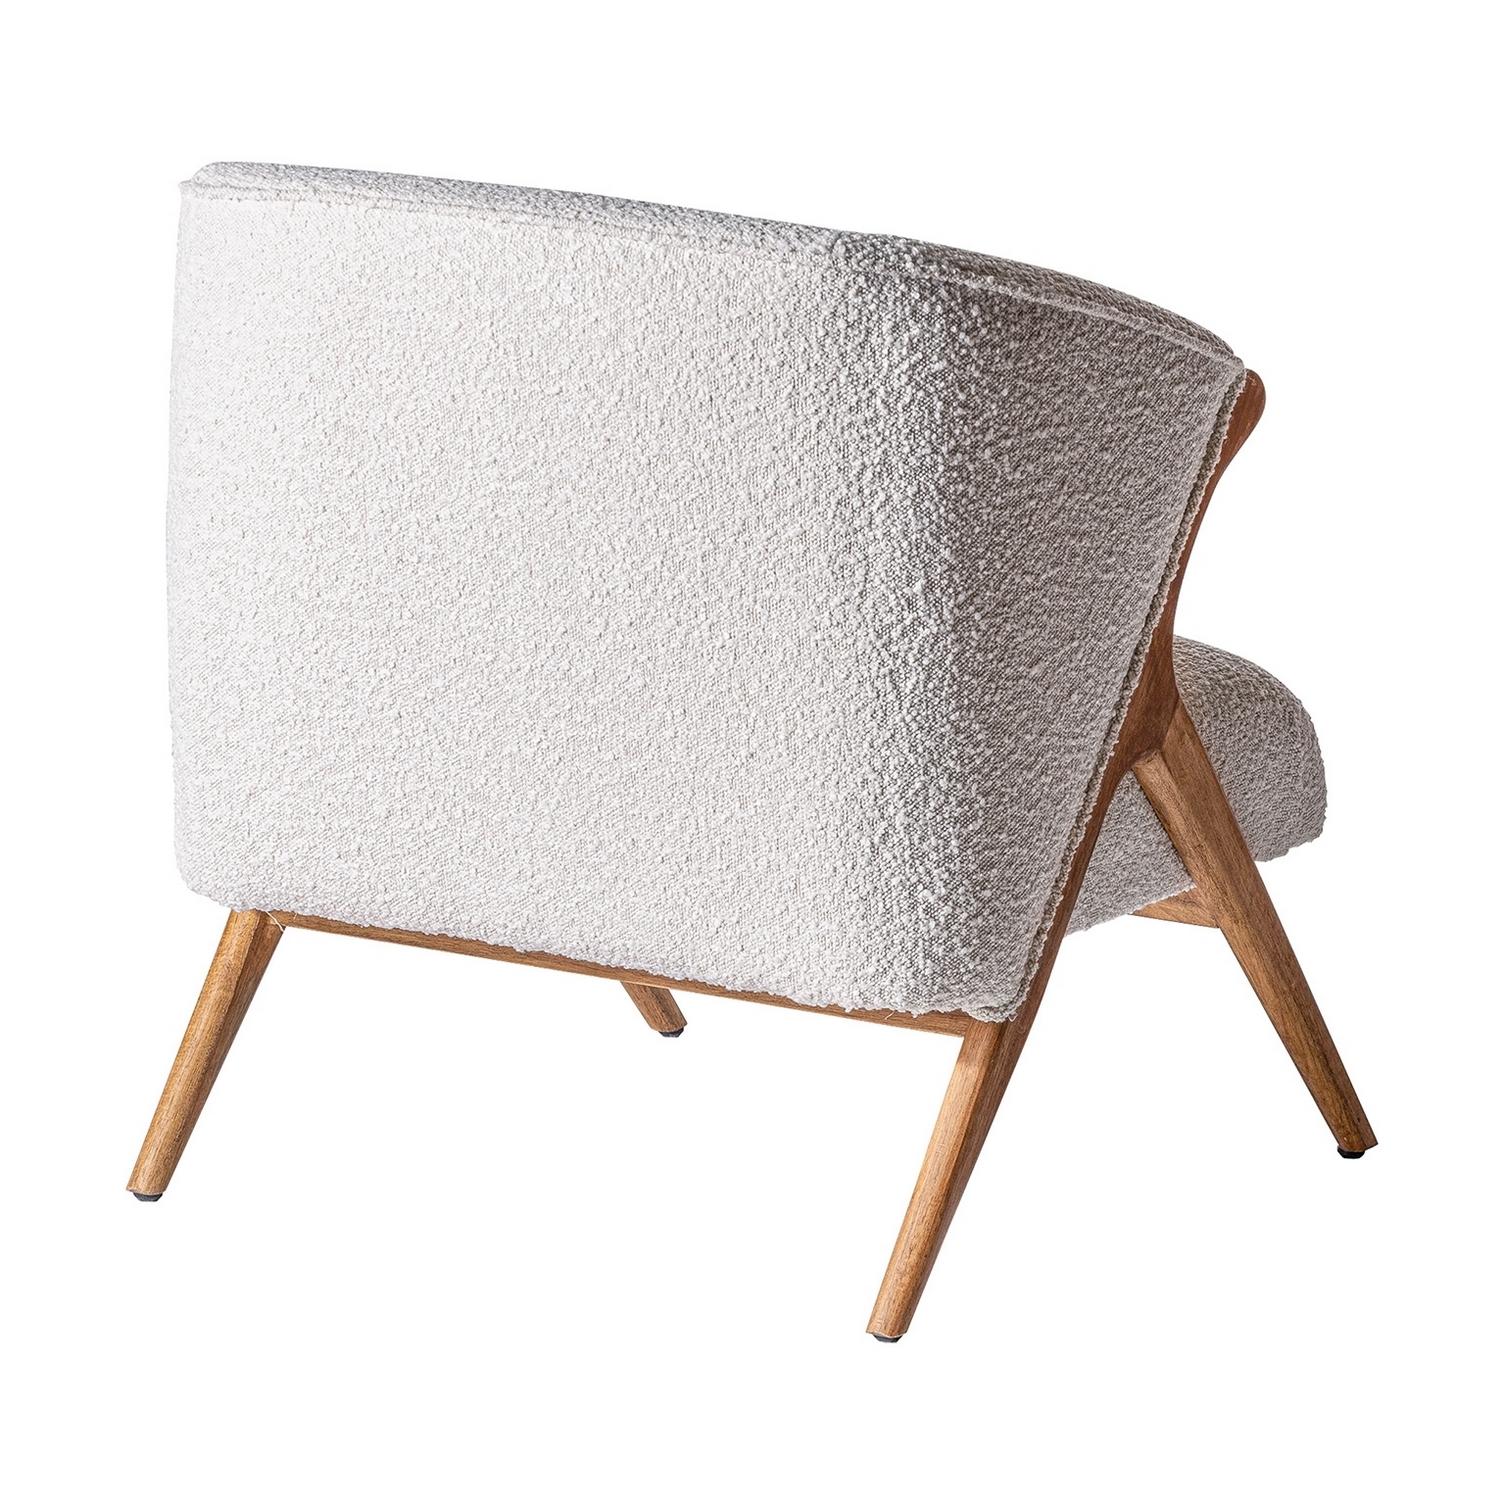 Wooden structure adorned with bouclé fabric lounge armchair in a Mid-Century Modern style.